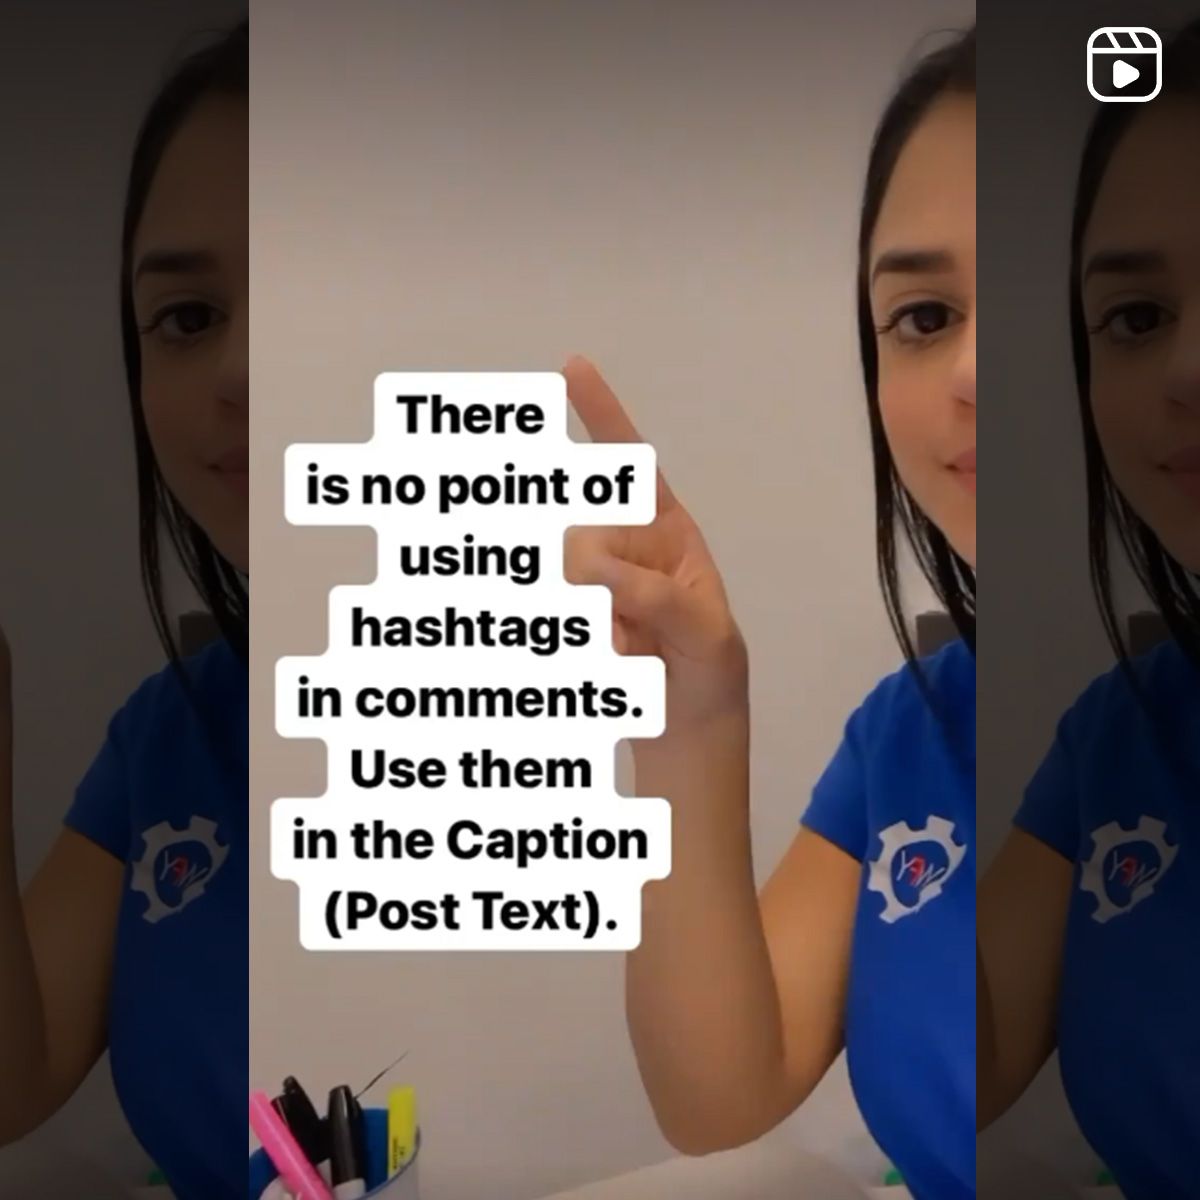 The is no point of using hashtags in comments. Use them in the captio (post text)